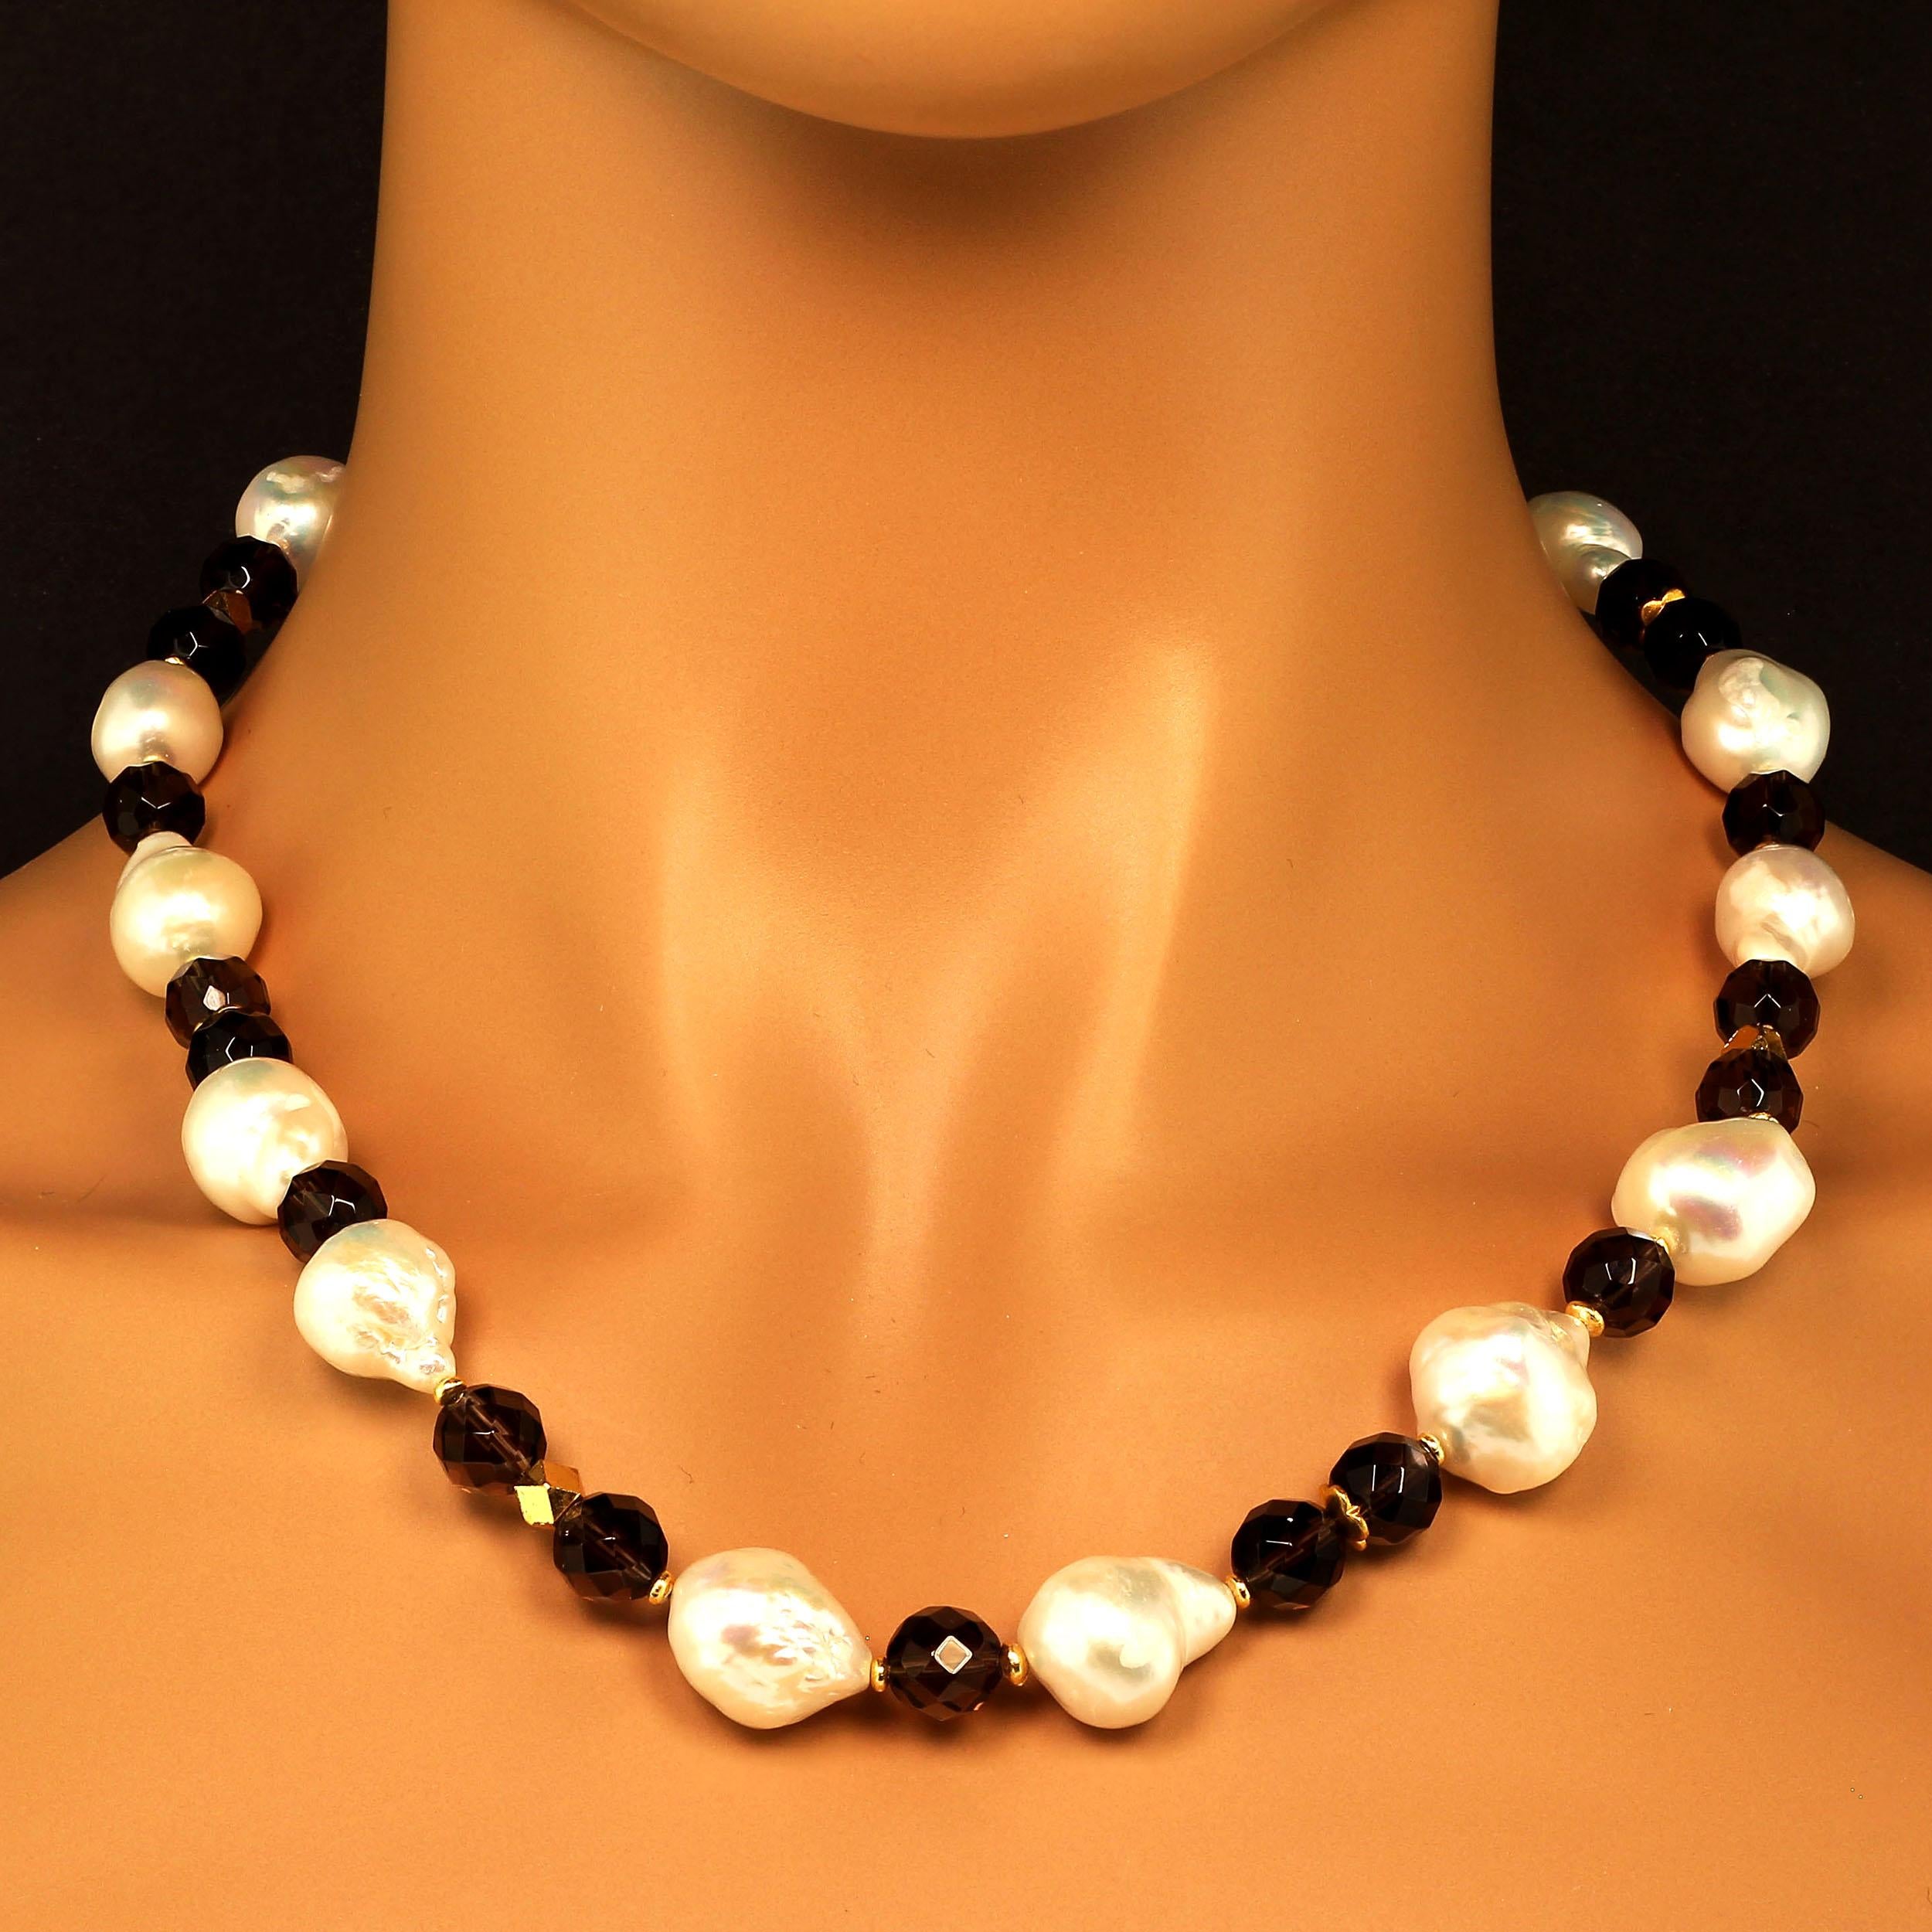 Women's AJD Freshwater Pearl and Smoky Quartz Necklace June Birthstone